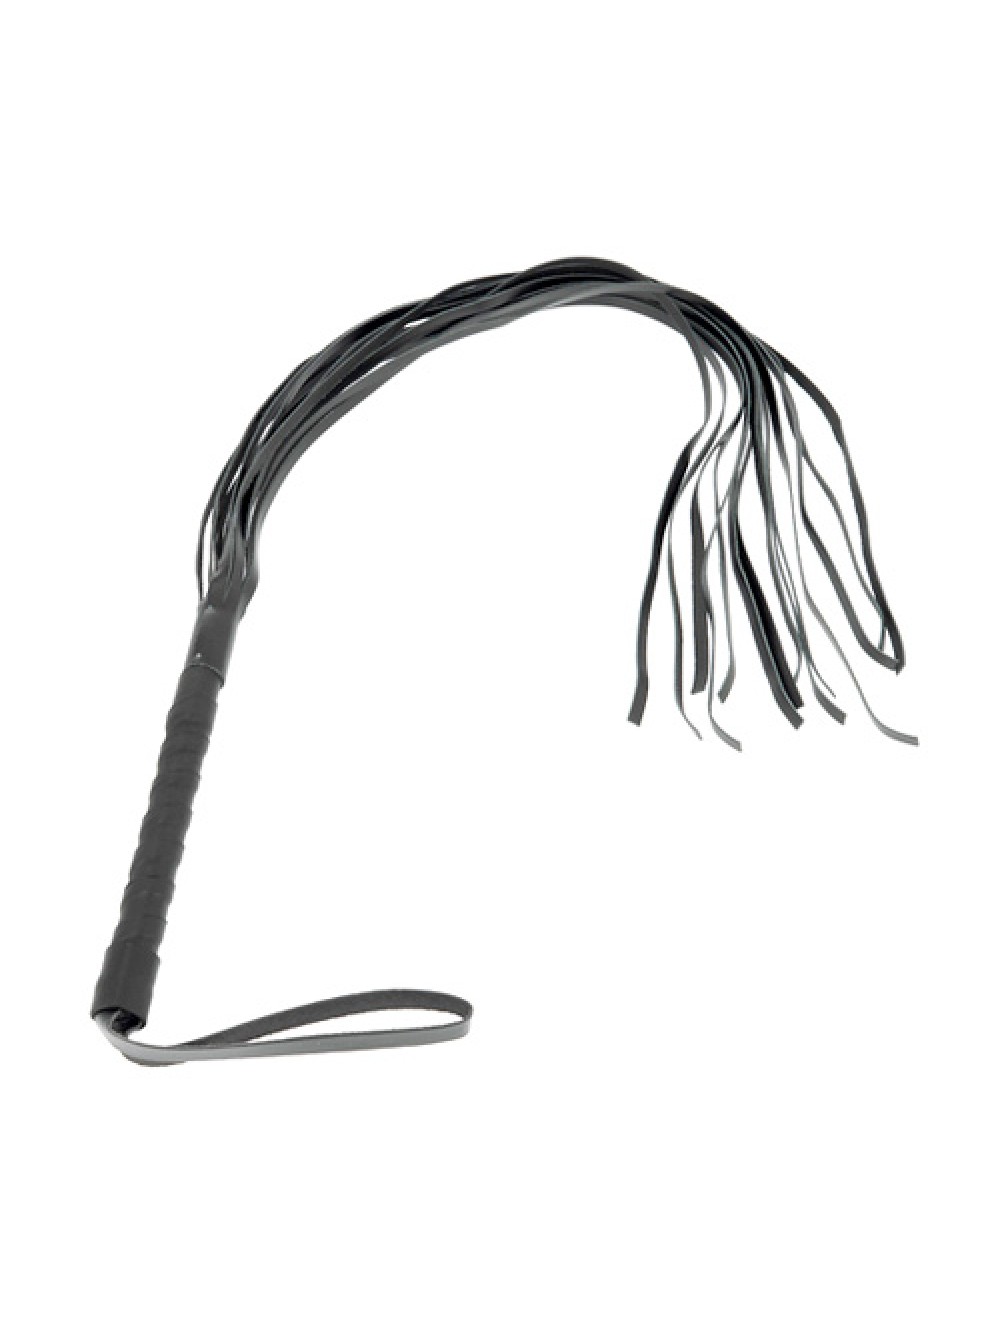 Leather Whip 31.5 Inches 8718924230459